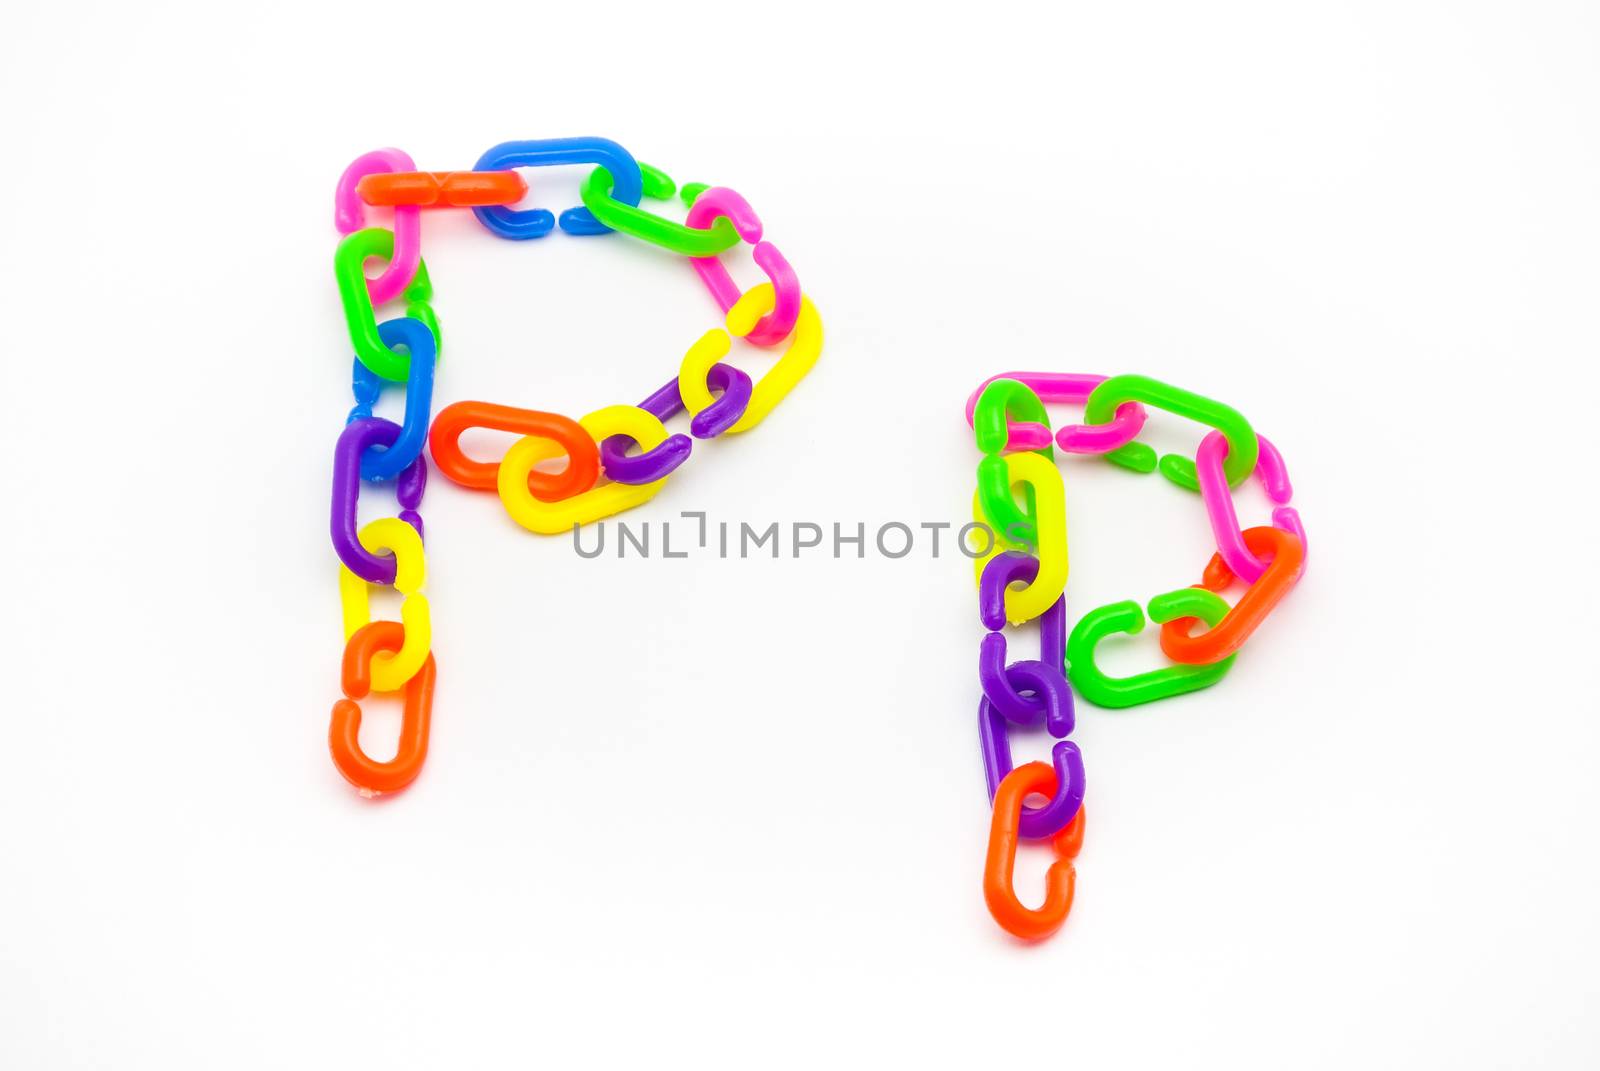 P and p Alphabet, Created by Colorful Plastic Chain.